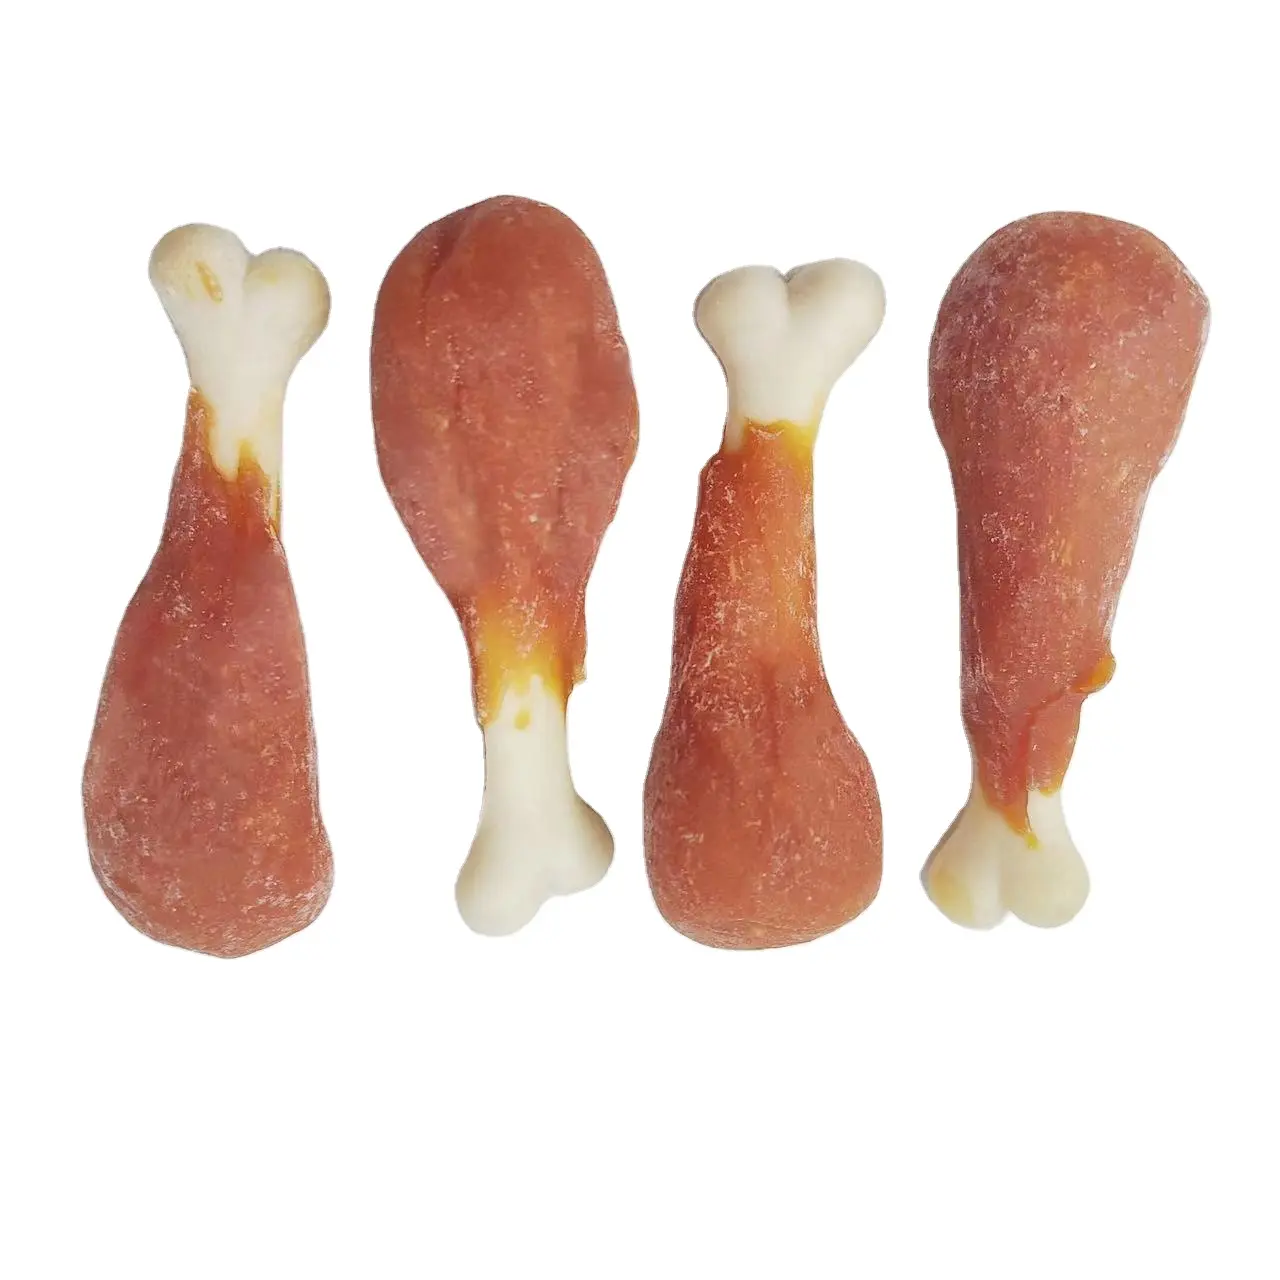 High Quality Fresh Meat High Protein Natural Nutrition Chicken wrapped knotted bones rawhide dog treats wholesale pet treats